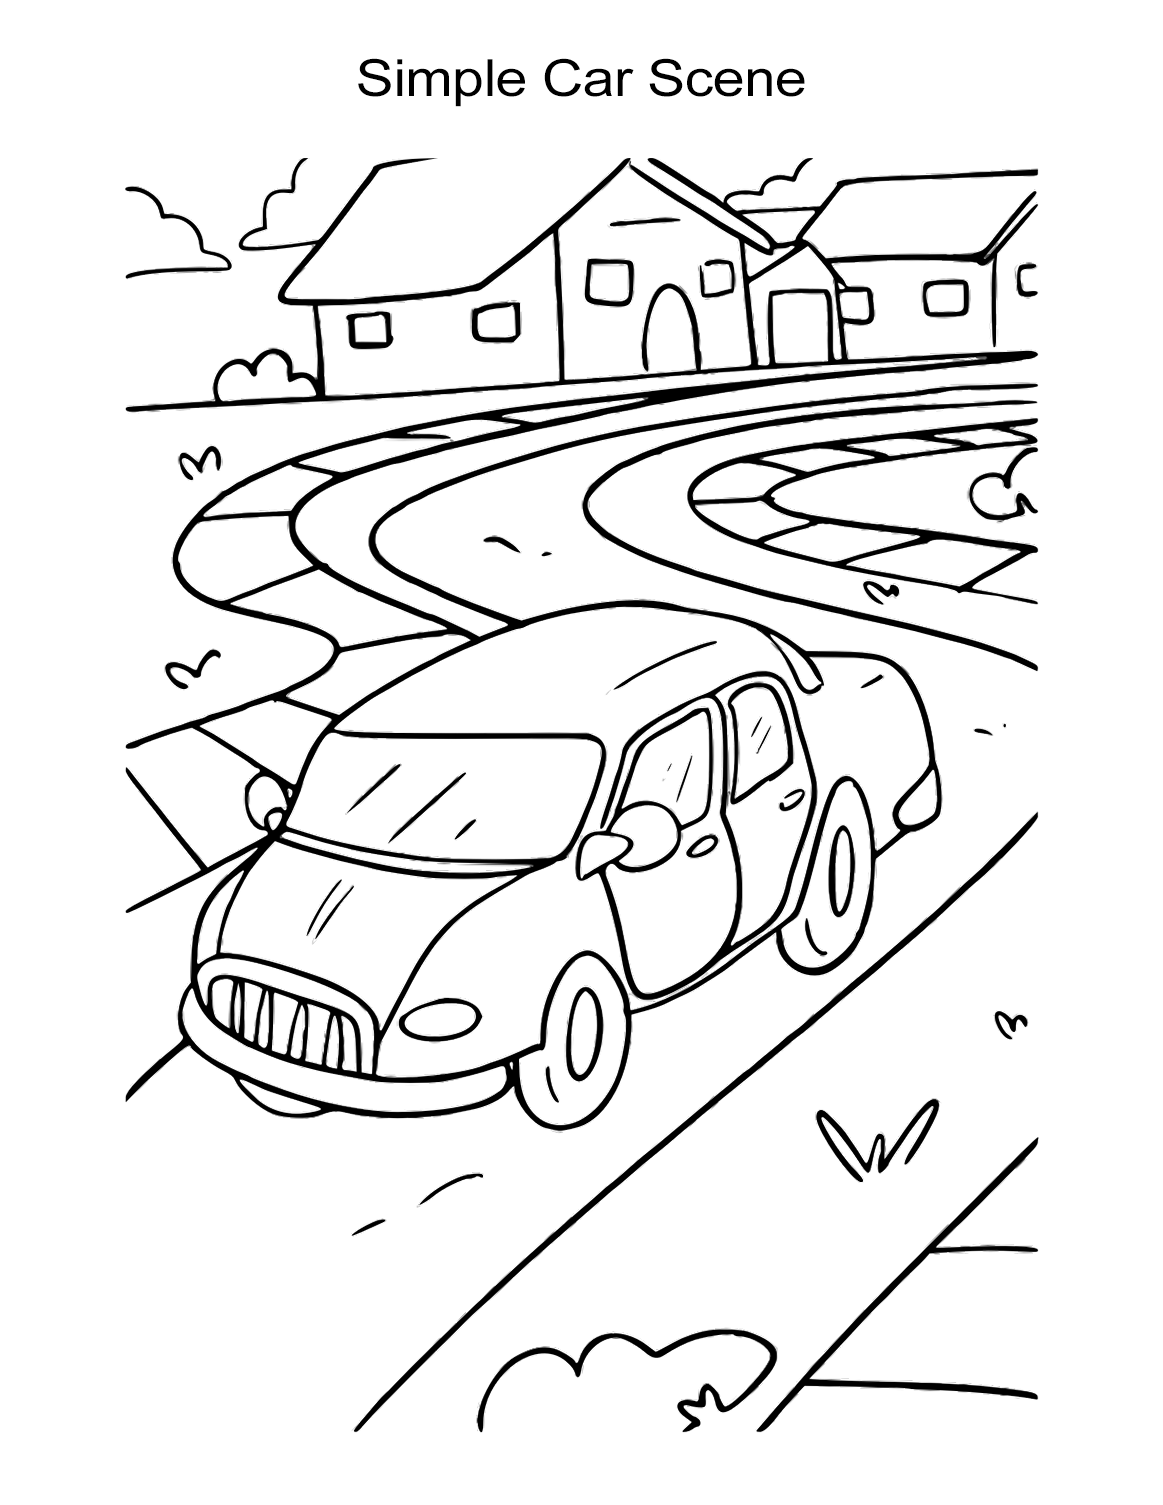 10 Car Coloring Sheets: Sports, Muscle, Racing Cars and More - ALL ESL